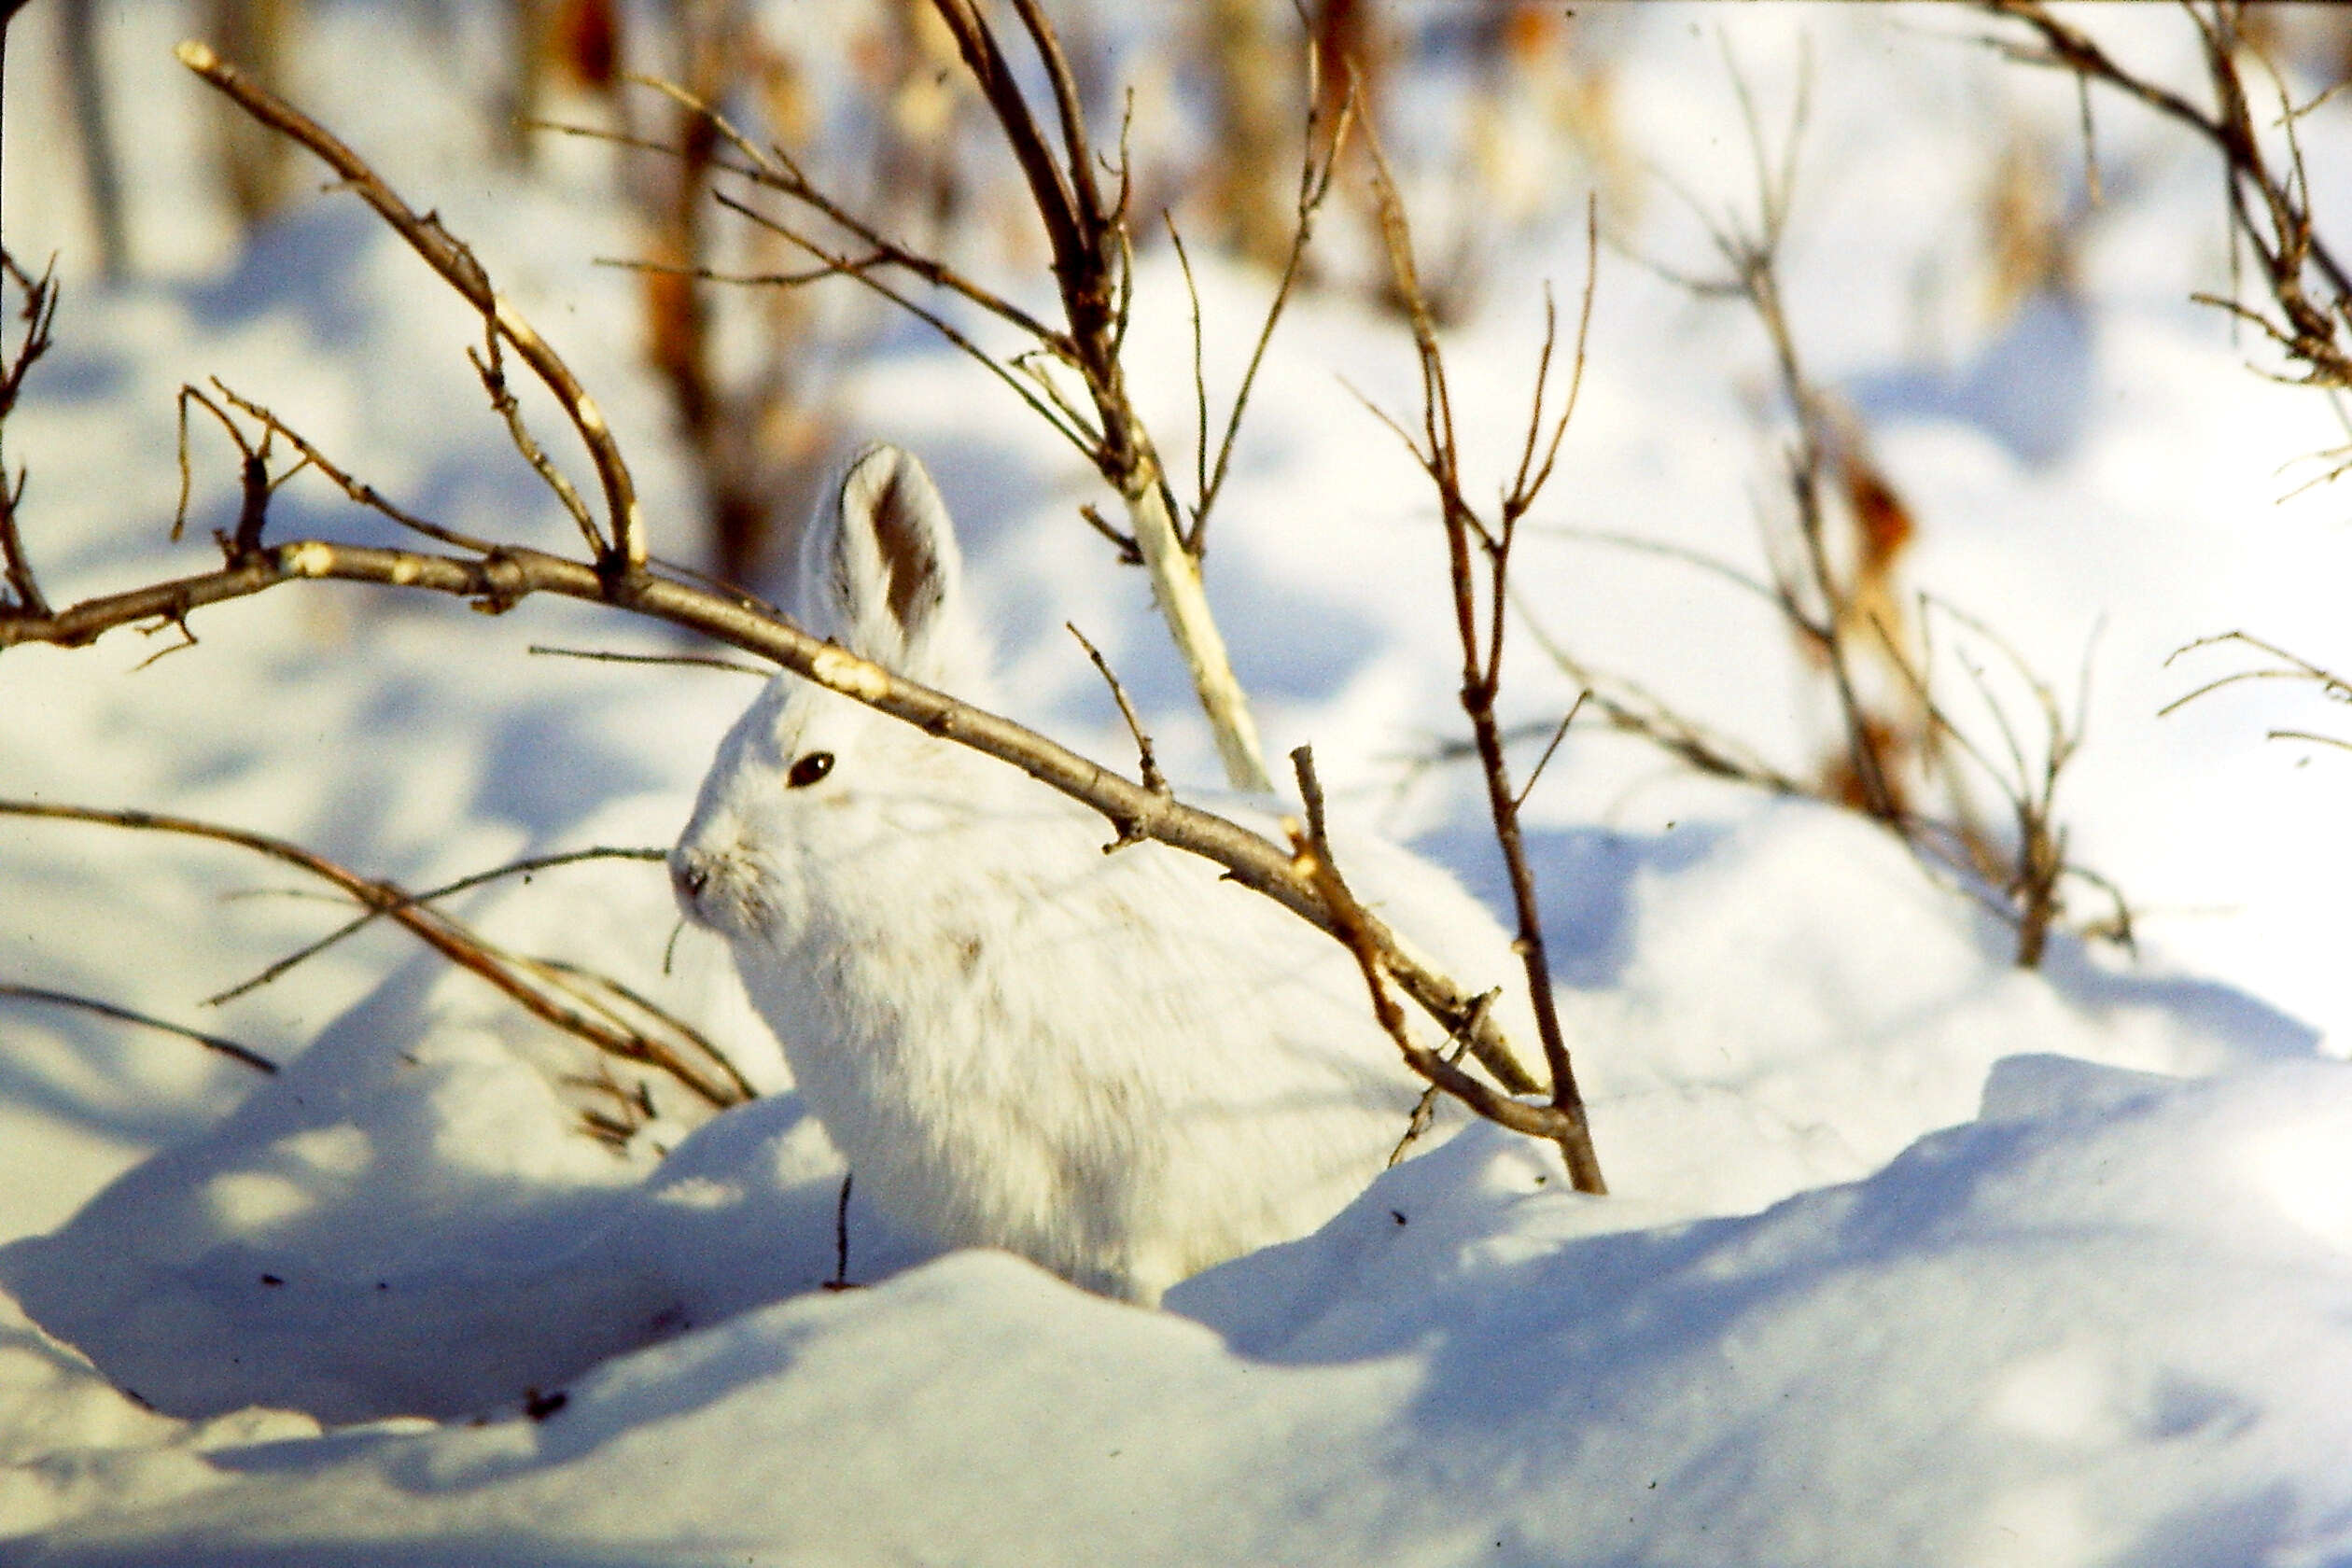 Image of snowshoe hare